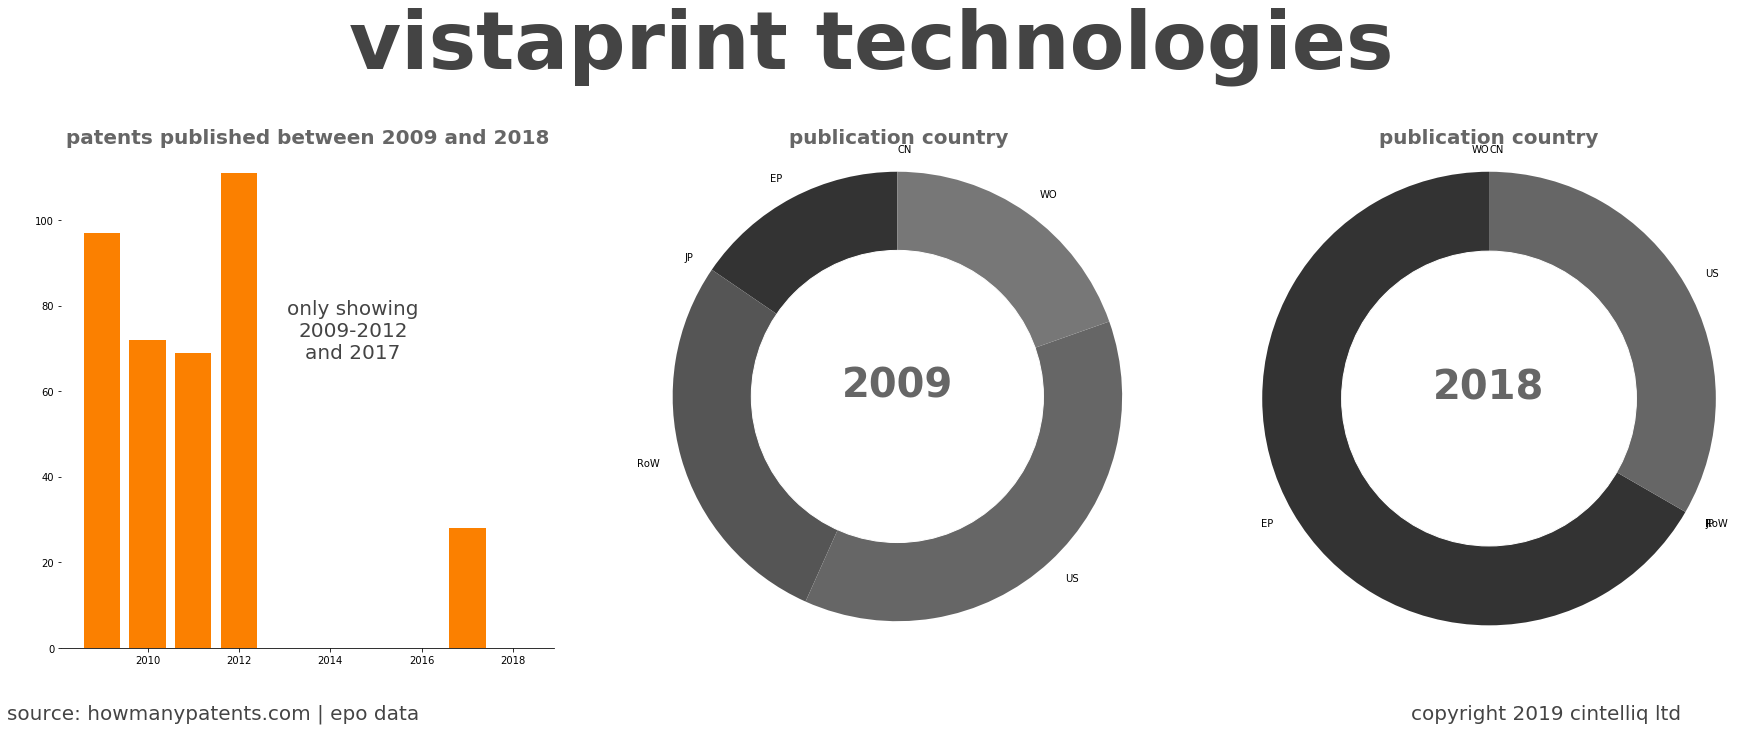 summary of patents for Vistaprint Technologies